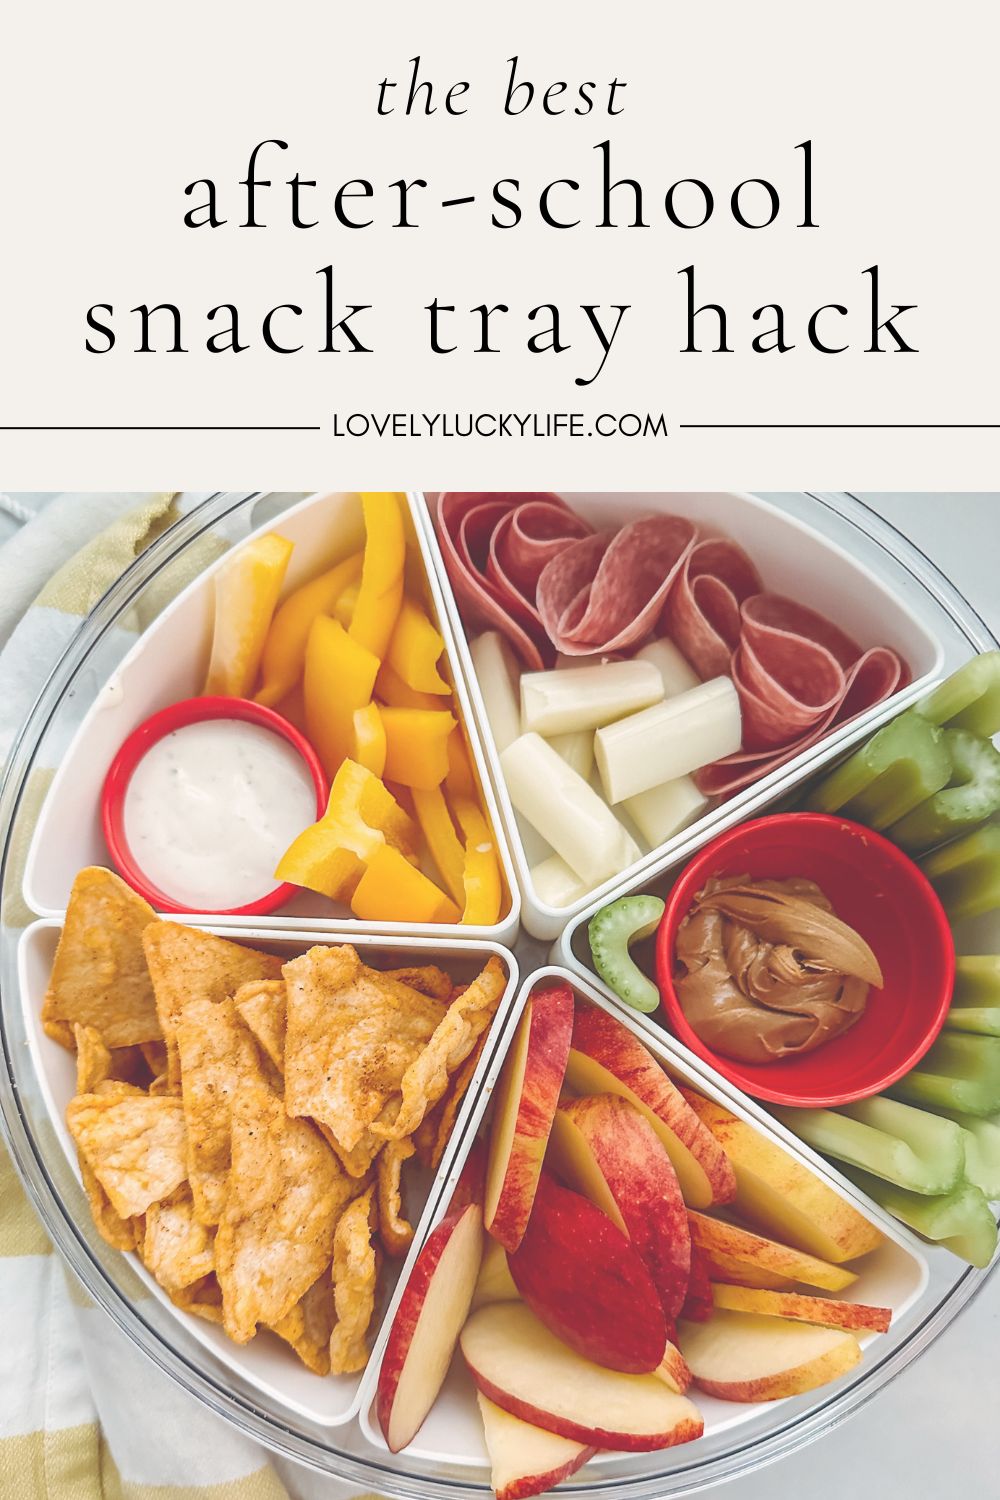 The Best After-School Snack Tray Hack from LovelyLuckyLife